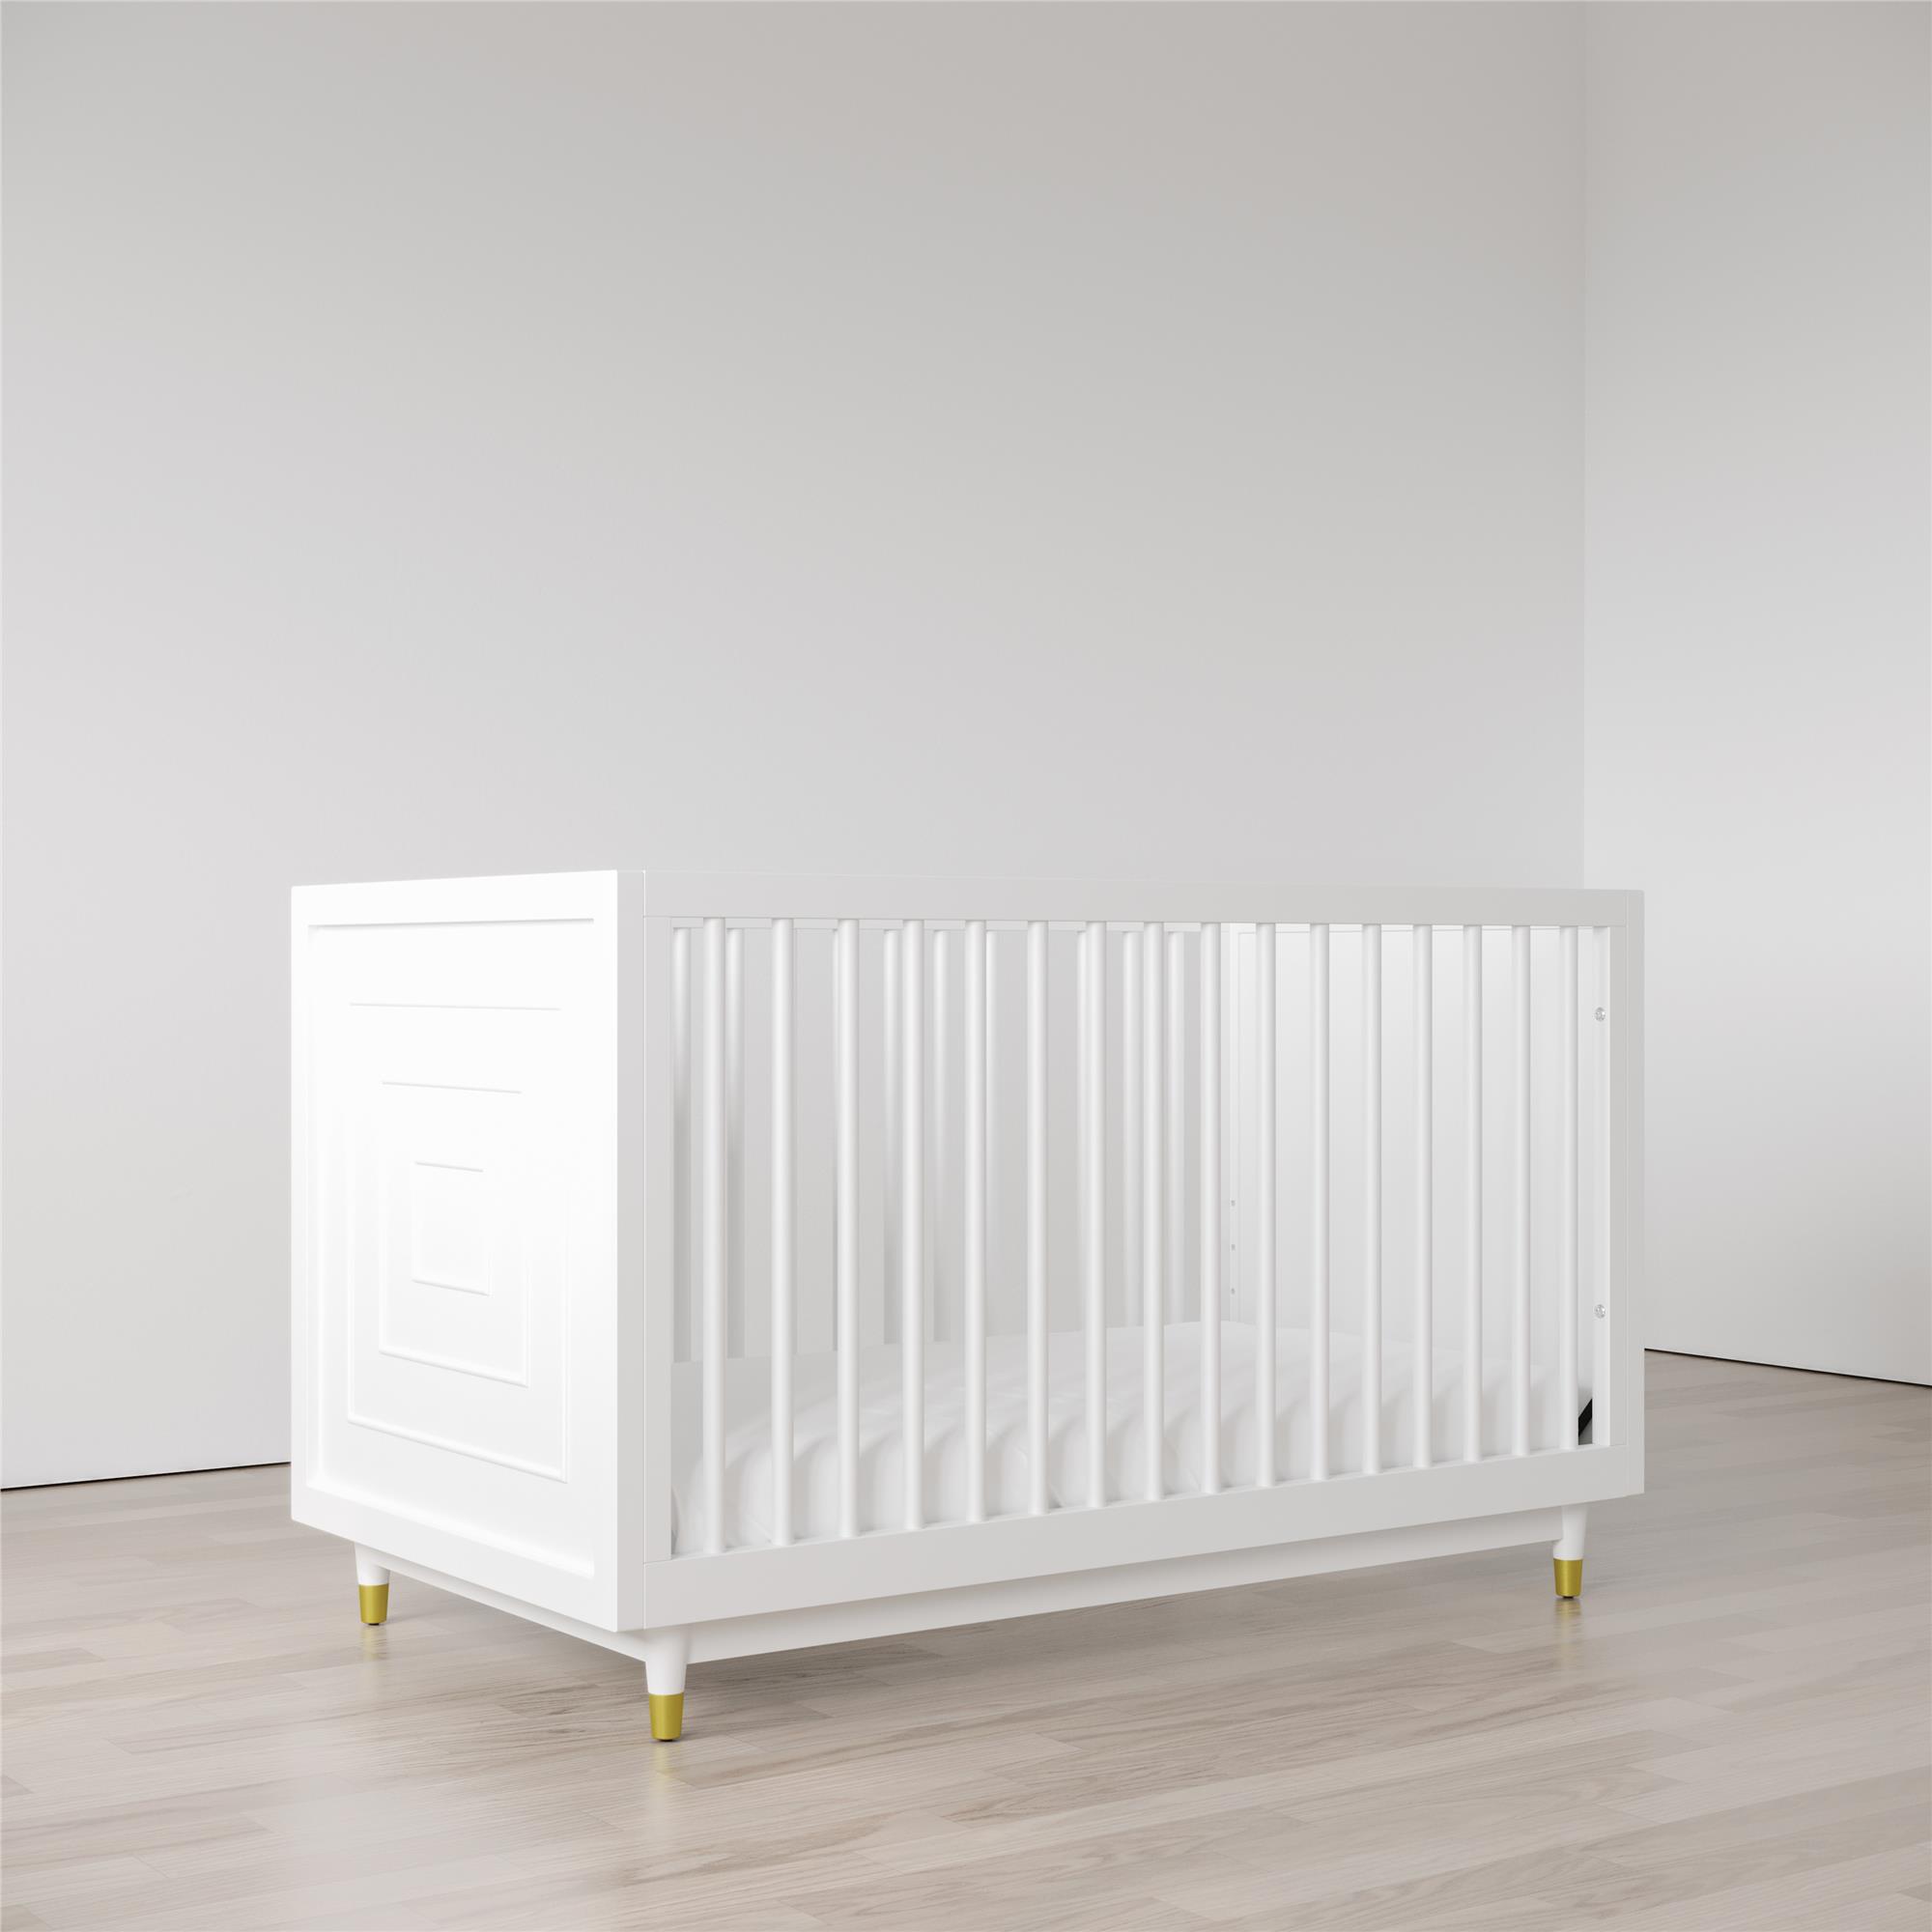 Little Seeds Aviary 3-in-1 Crib with Adjustable Mattress Height, White - image 5 of 32